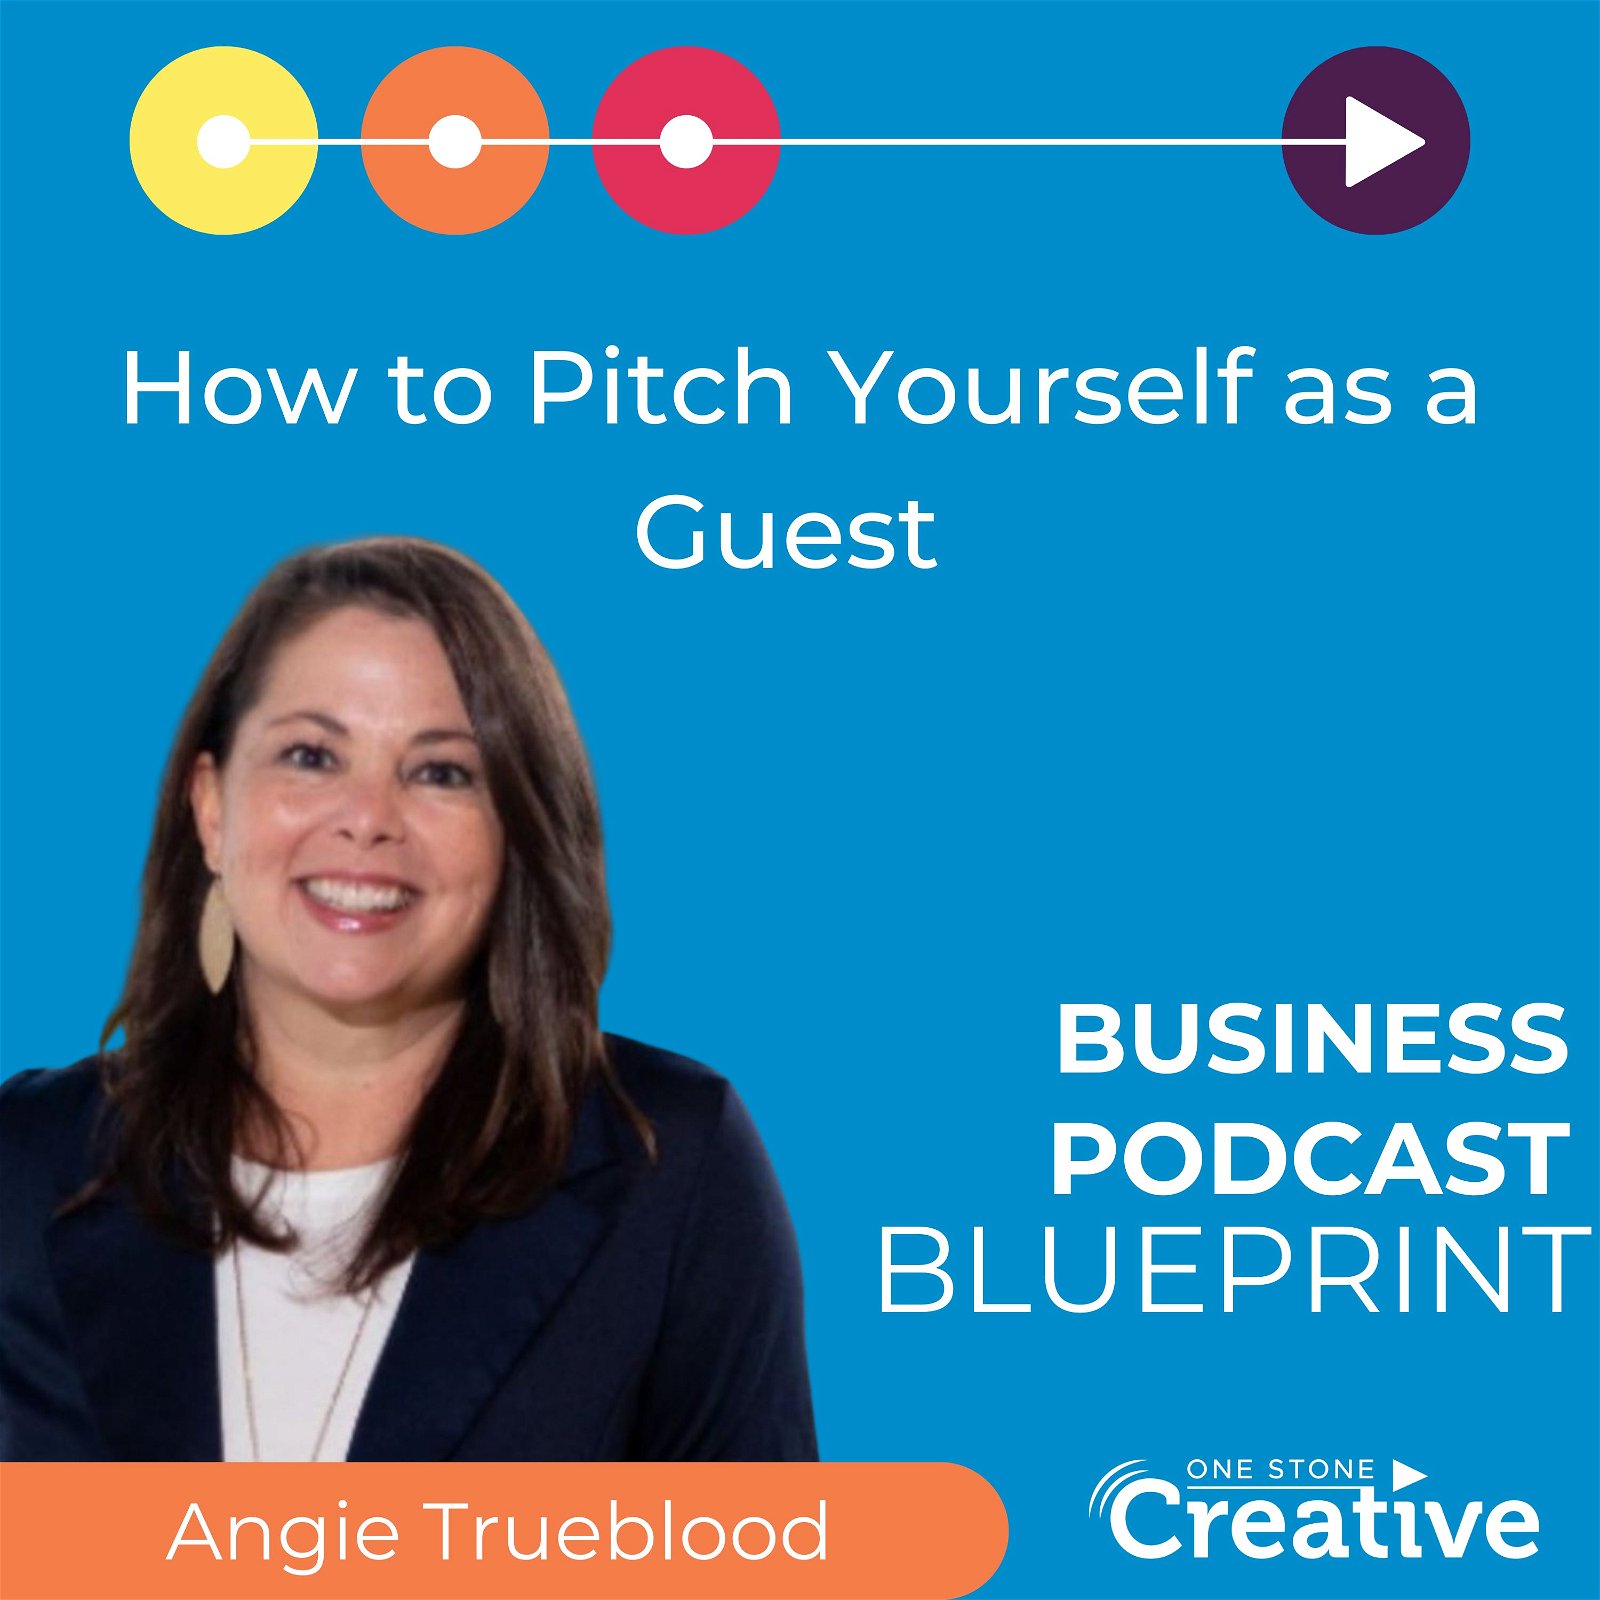 How to Pitch Yourself as a Guest